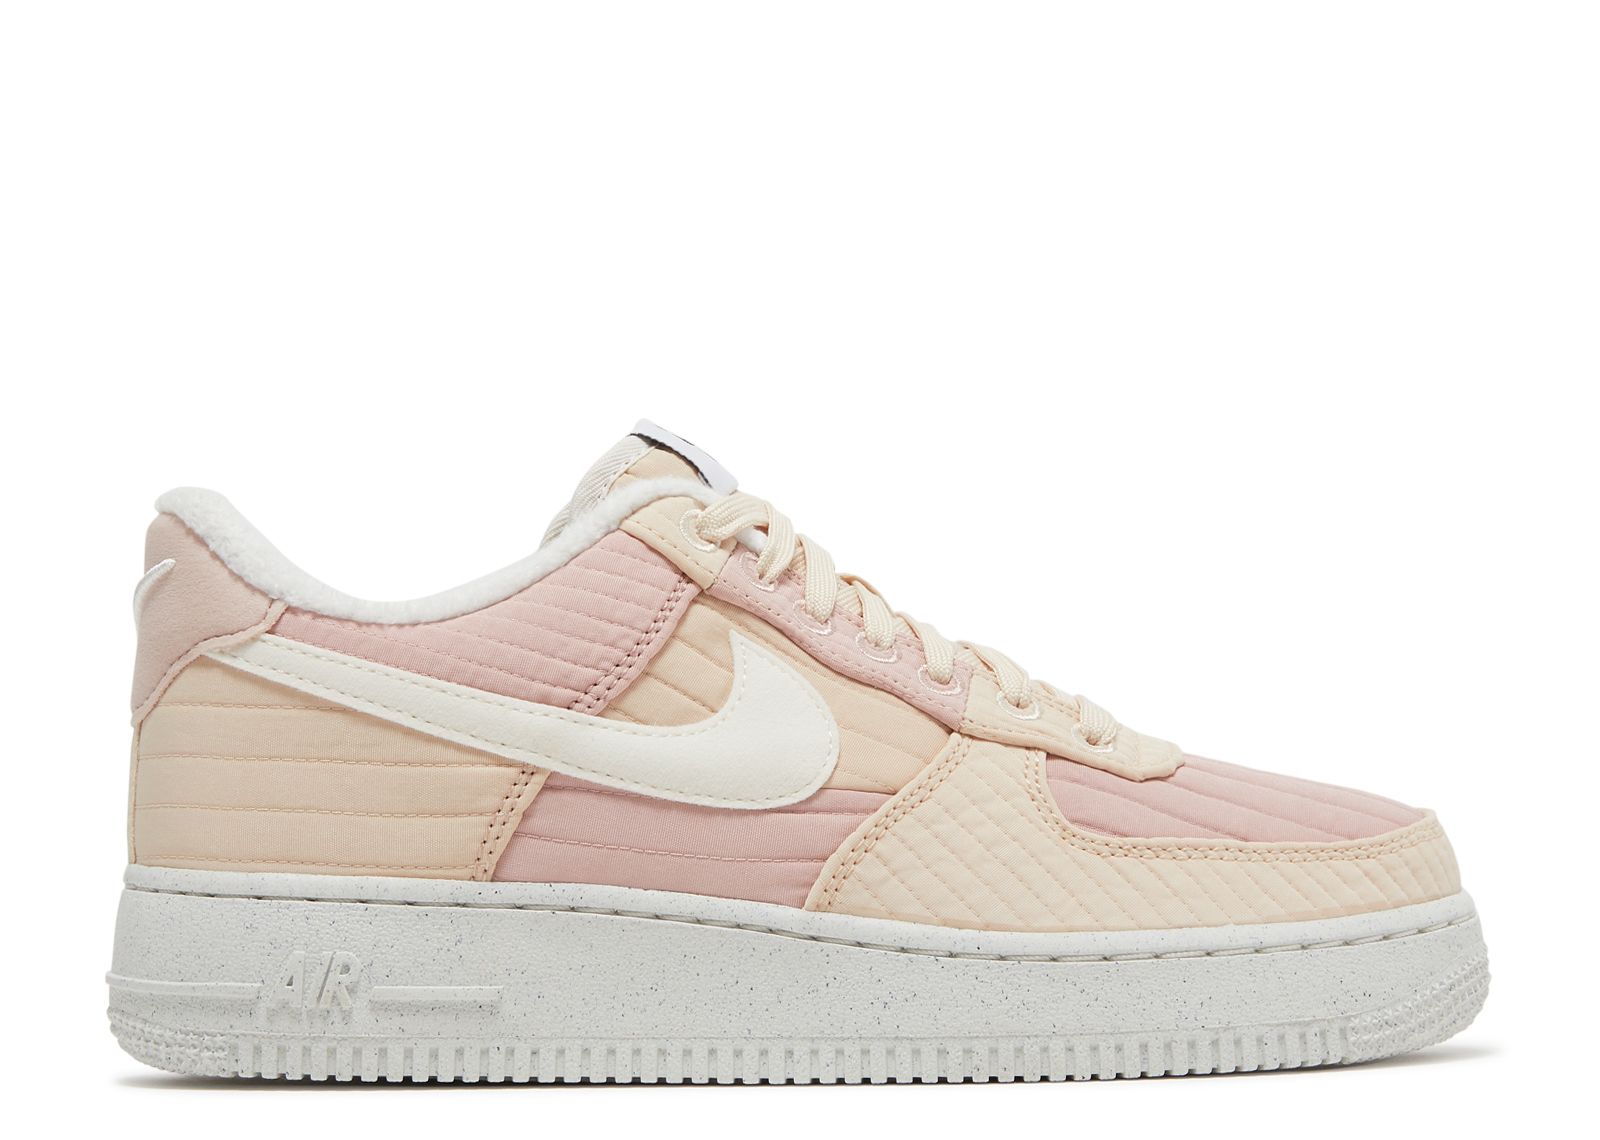 Wmns Air Force 1 '07 Low LXX 'Toasty Pearl - Nike - DH0775 201 - pearl white/sail/fossil stone | Flight Club